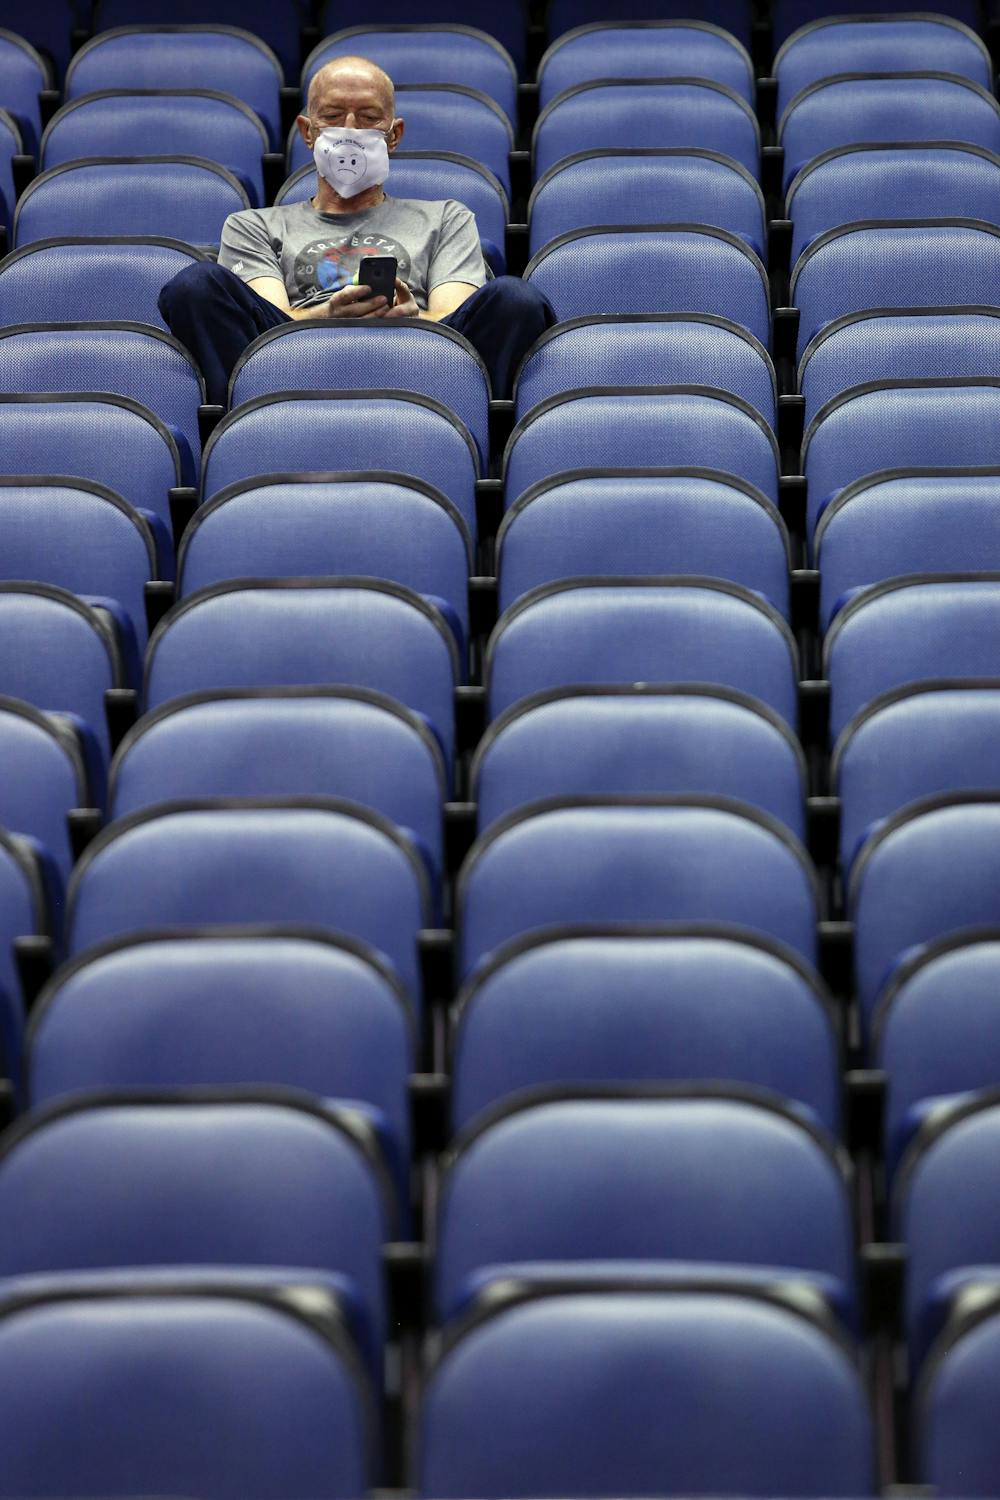 <p>Mike Lemcke, from Richmond, Va., sits in an empty Greensboro Coliseum after the NCAA college basketball games were cancelled at the Atlantic Coast Conference tournament in Greensboro, N.C., Thursday, March 12, 2020. The biggest conferences in college sports all canceled their basketball tournaments because of the new coronavirus, seemingly putting the NCAA Tournament in doubt. (AP Photo/Ben McKeown)</p>